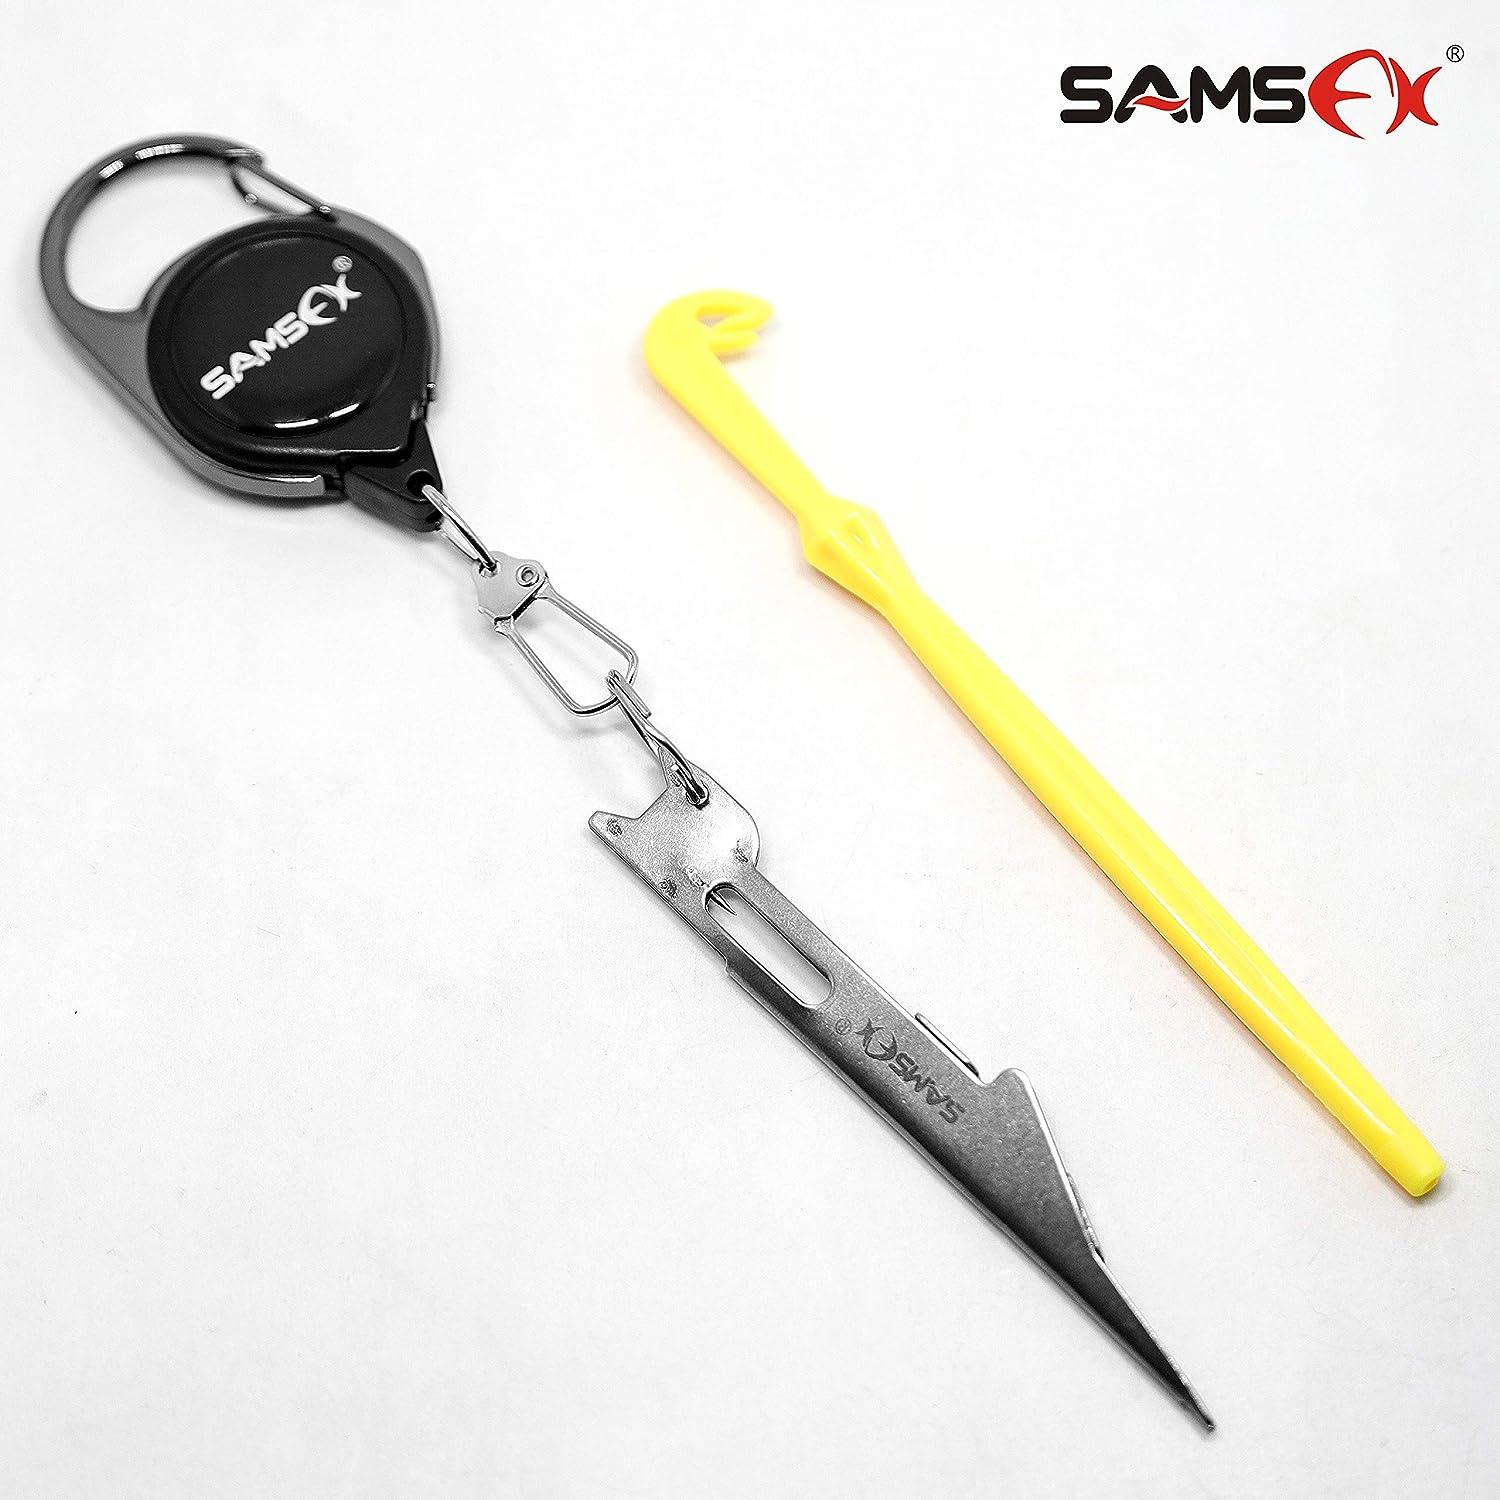 SAMSFX Fishing Quick Knot Tying Tool 3.7 Large Size 4 in 1 Mono Line  Clipper with Zinger Retractor Combo (2sets Black Knot Tool & Oval Zinger)